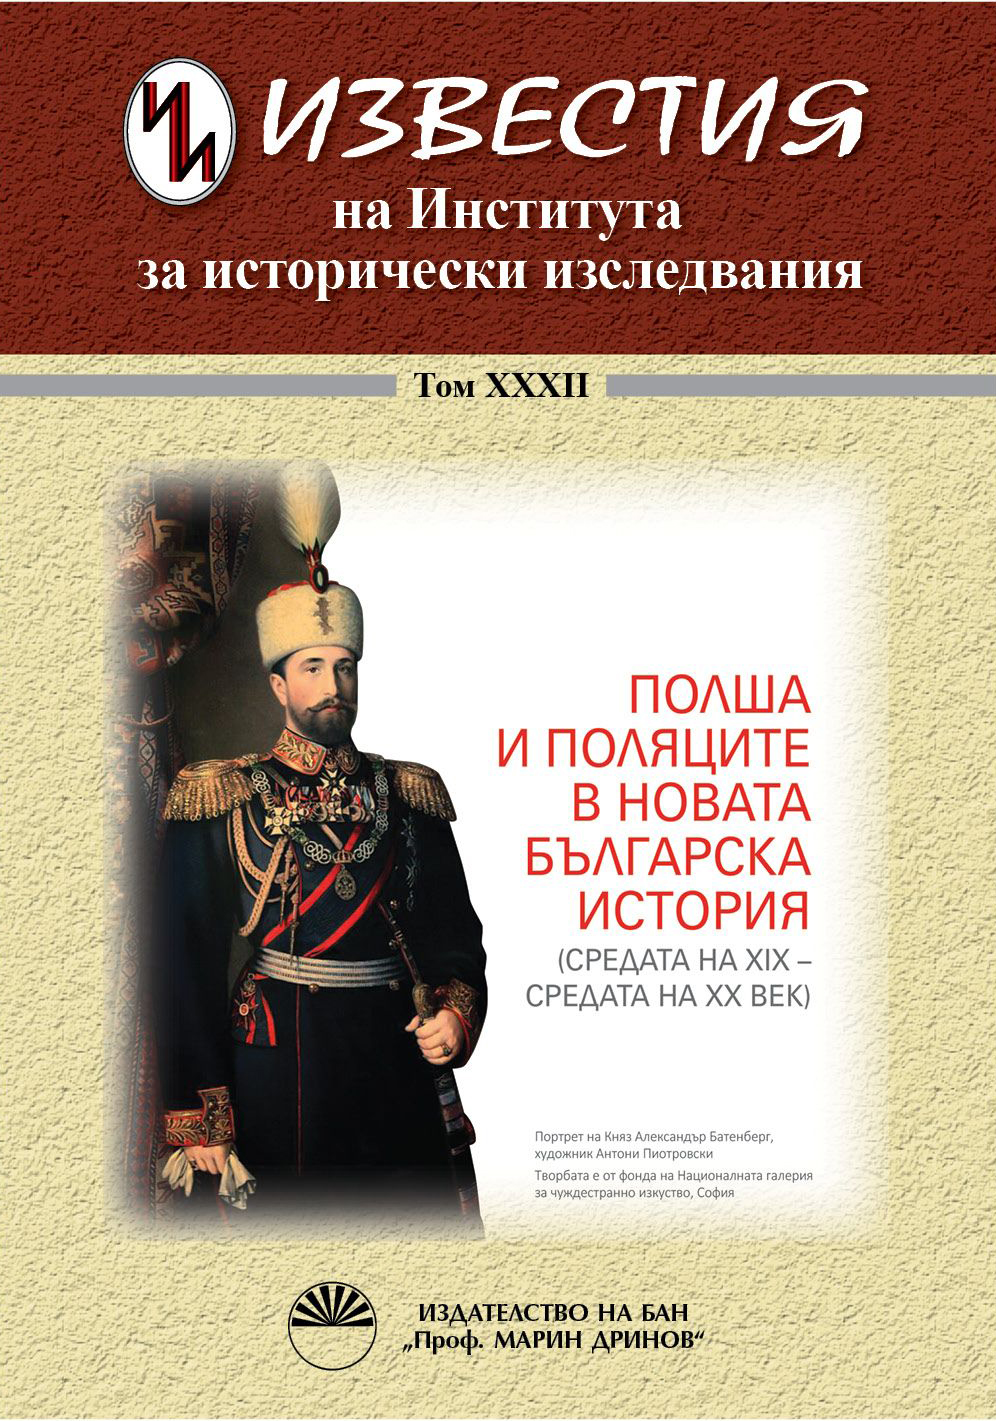 Bulgarian-Polish Cultural and Scientific Relations in the 19th–20th Centuries Based on Documentary Sources from the Scientific Archive of BAS Cover Image